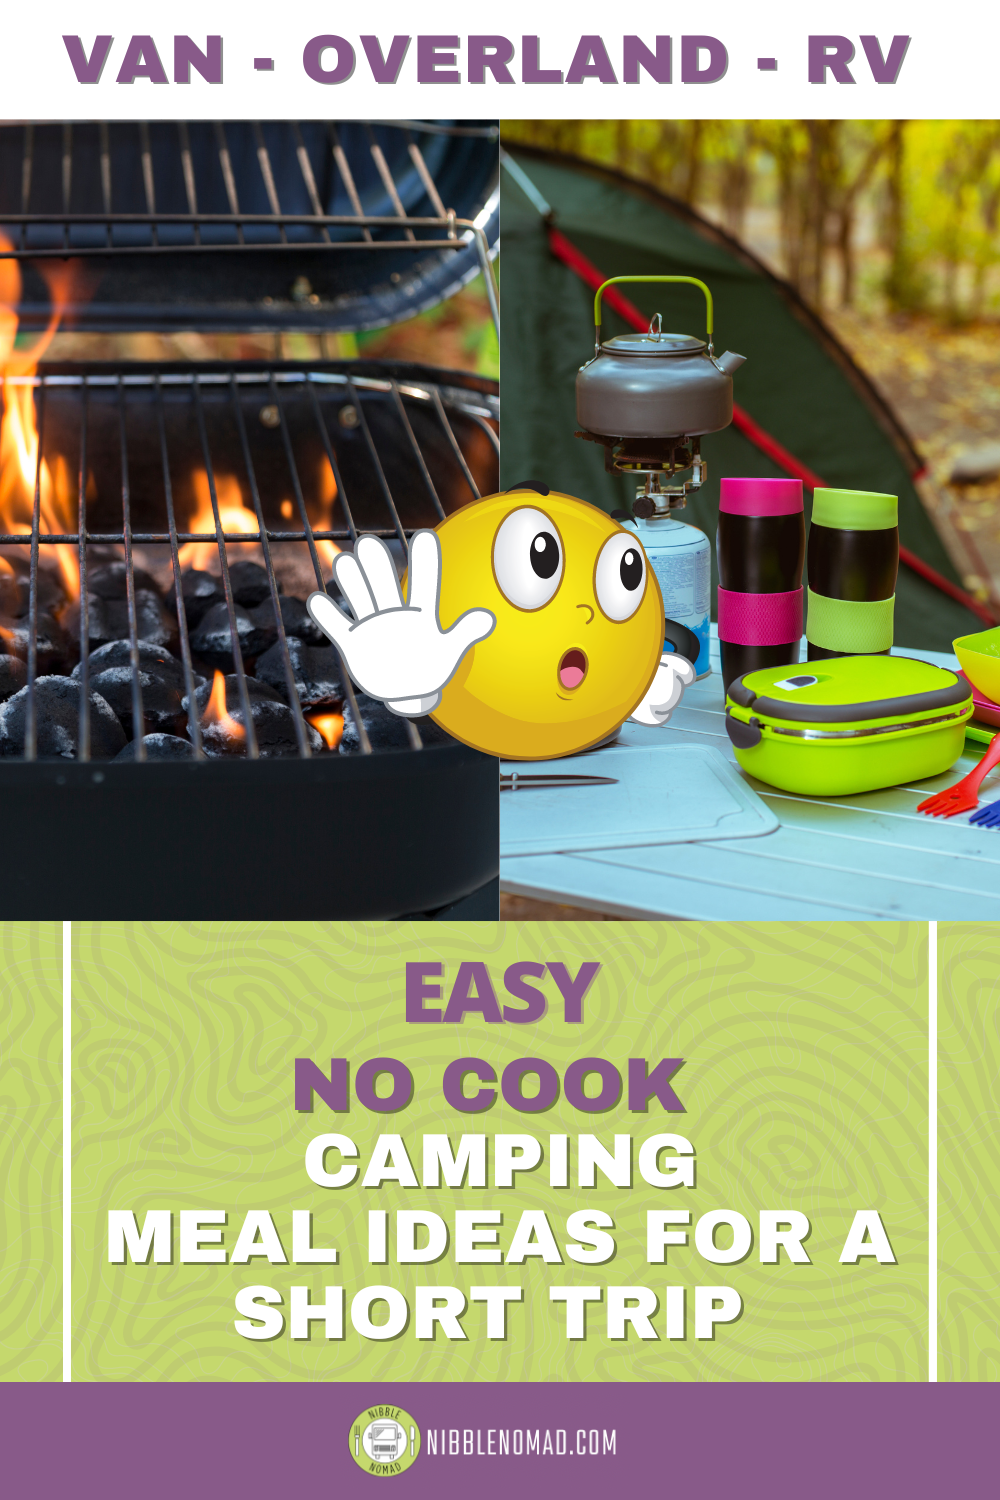 Easy-No-Cook-Camping-Meal-Ideas-For-A-Short-Trip-In-Vans-Overland-And-RV’s-Pin-Nibblenomad 2